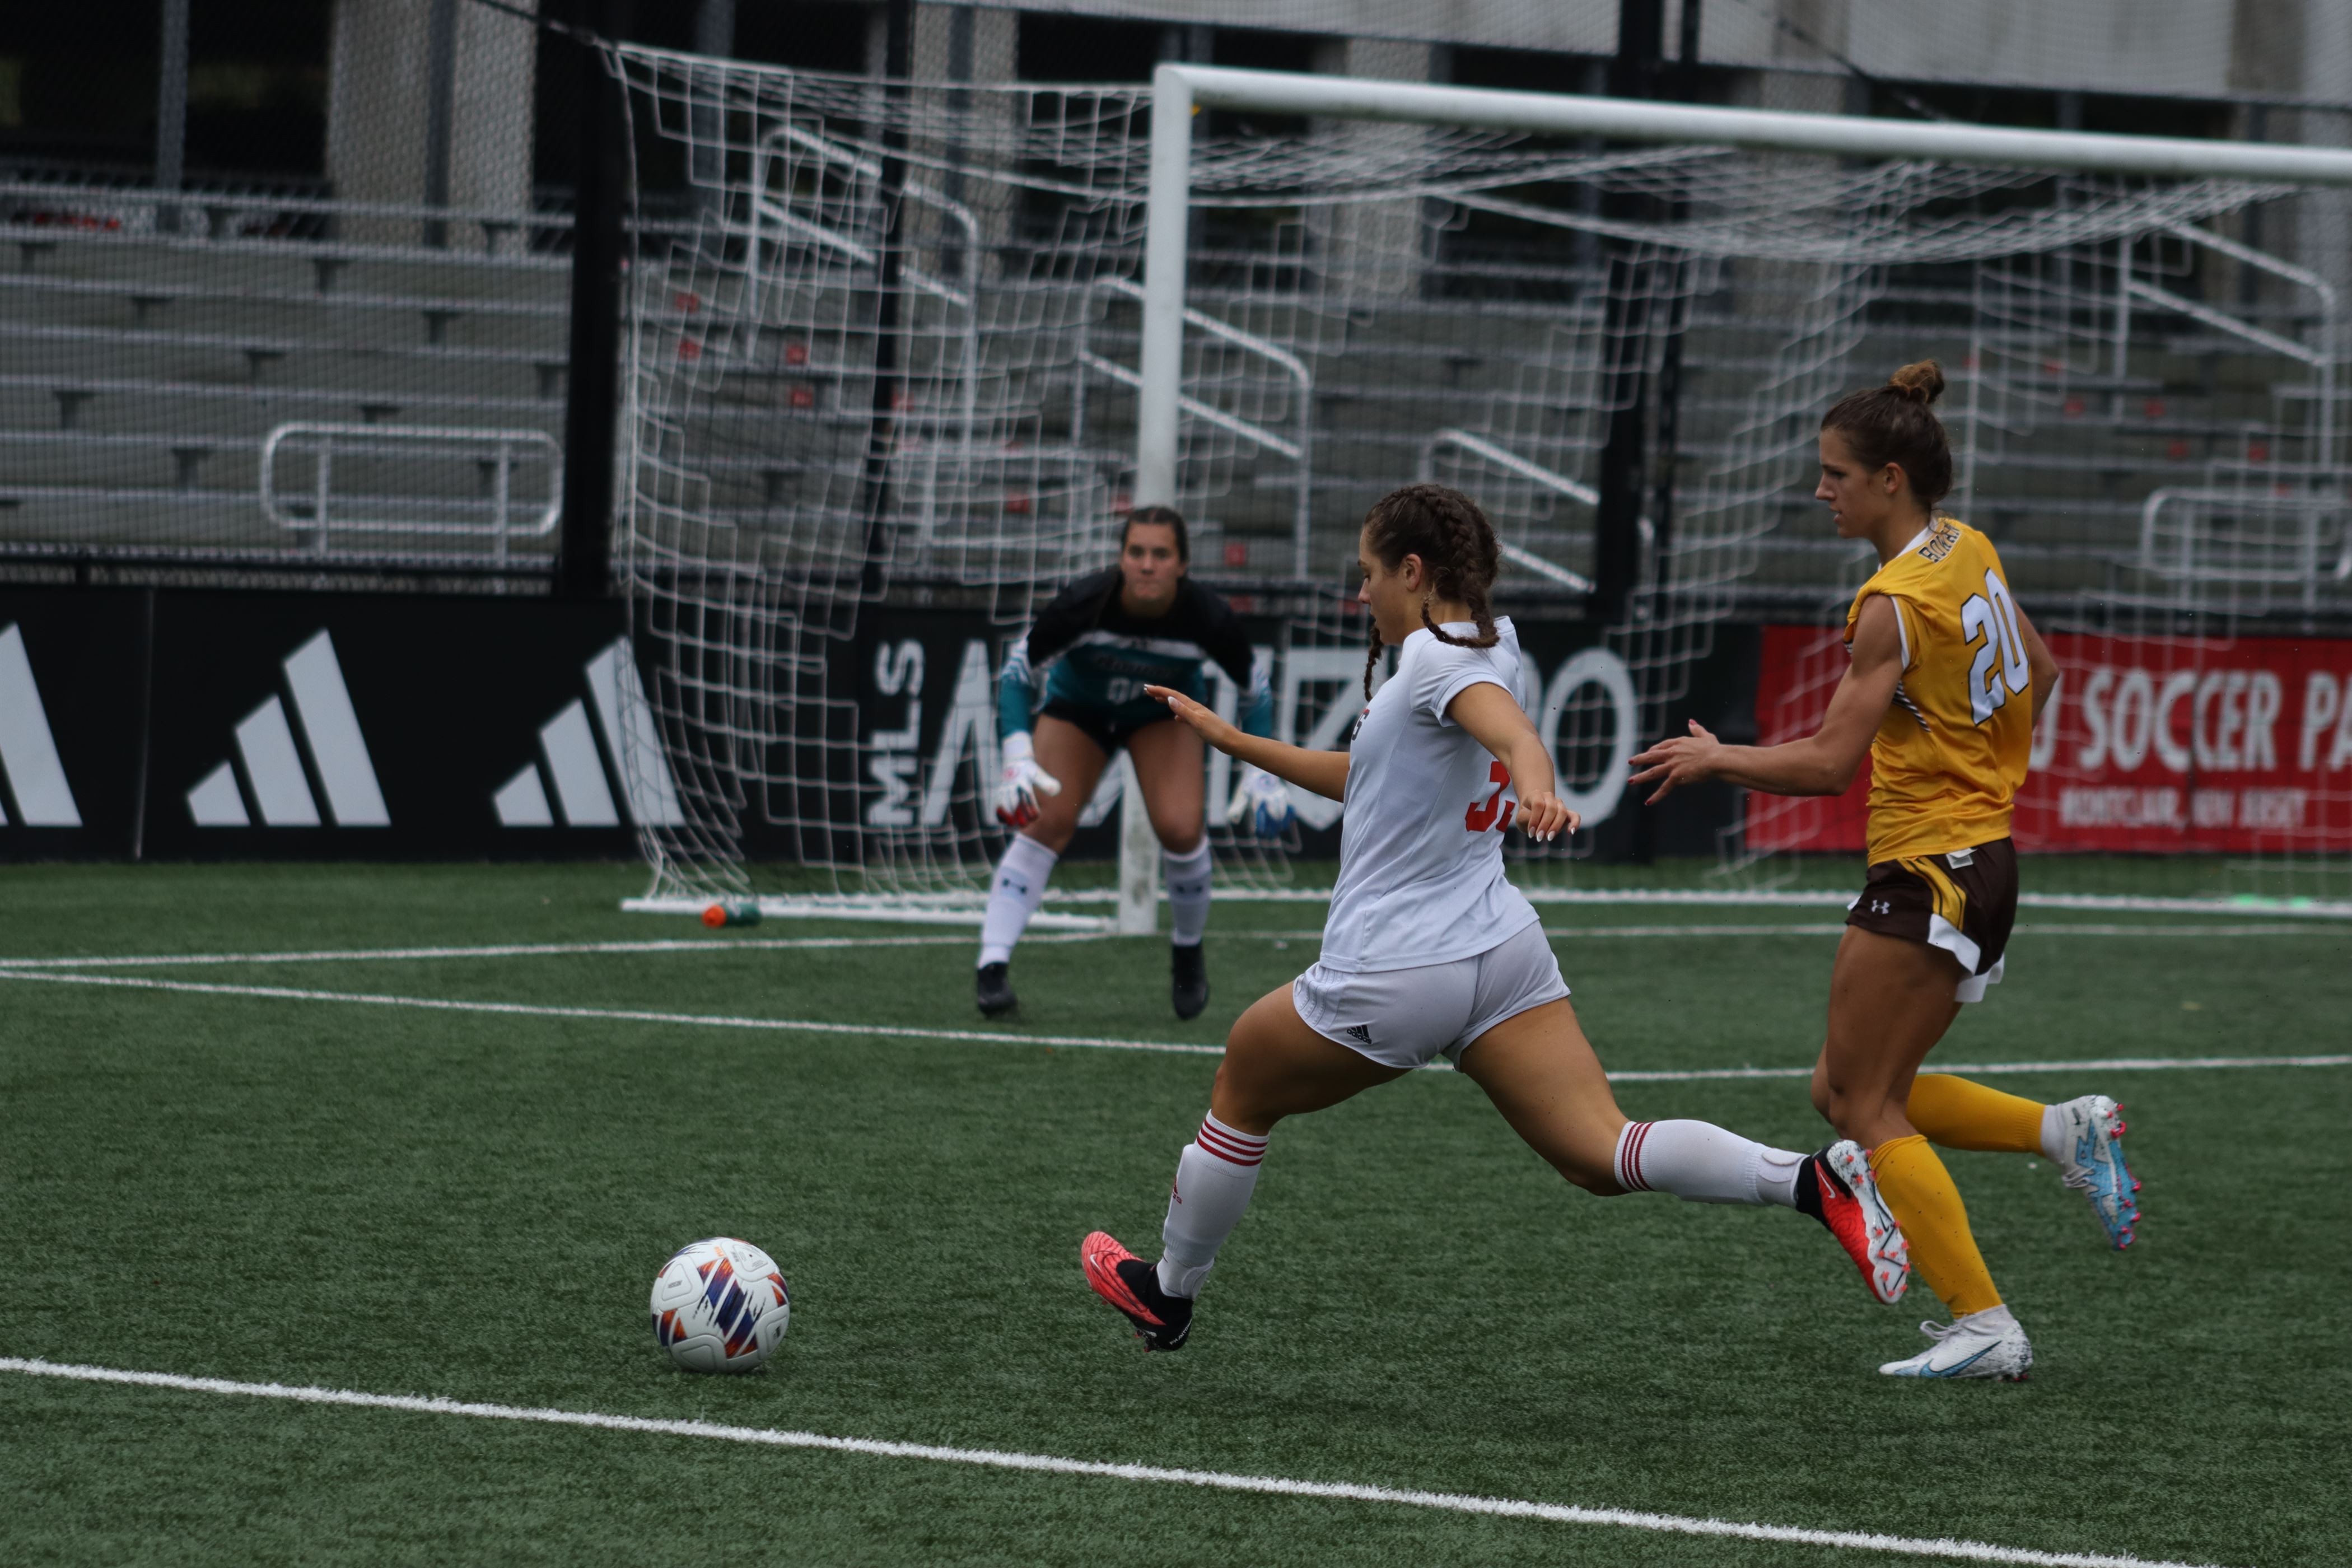 Freshman forward Gianna Curci attempting to create opportunities in the box. Photo courtesy of Trevor Giesberg